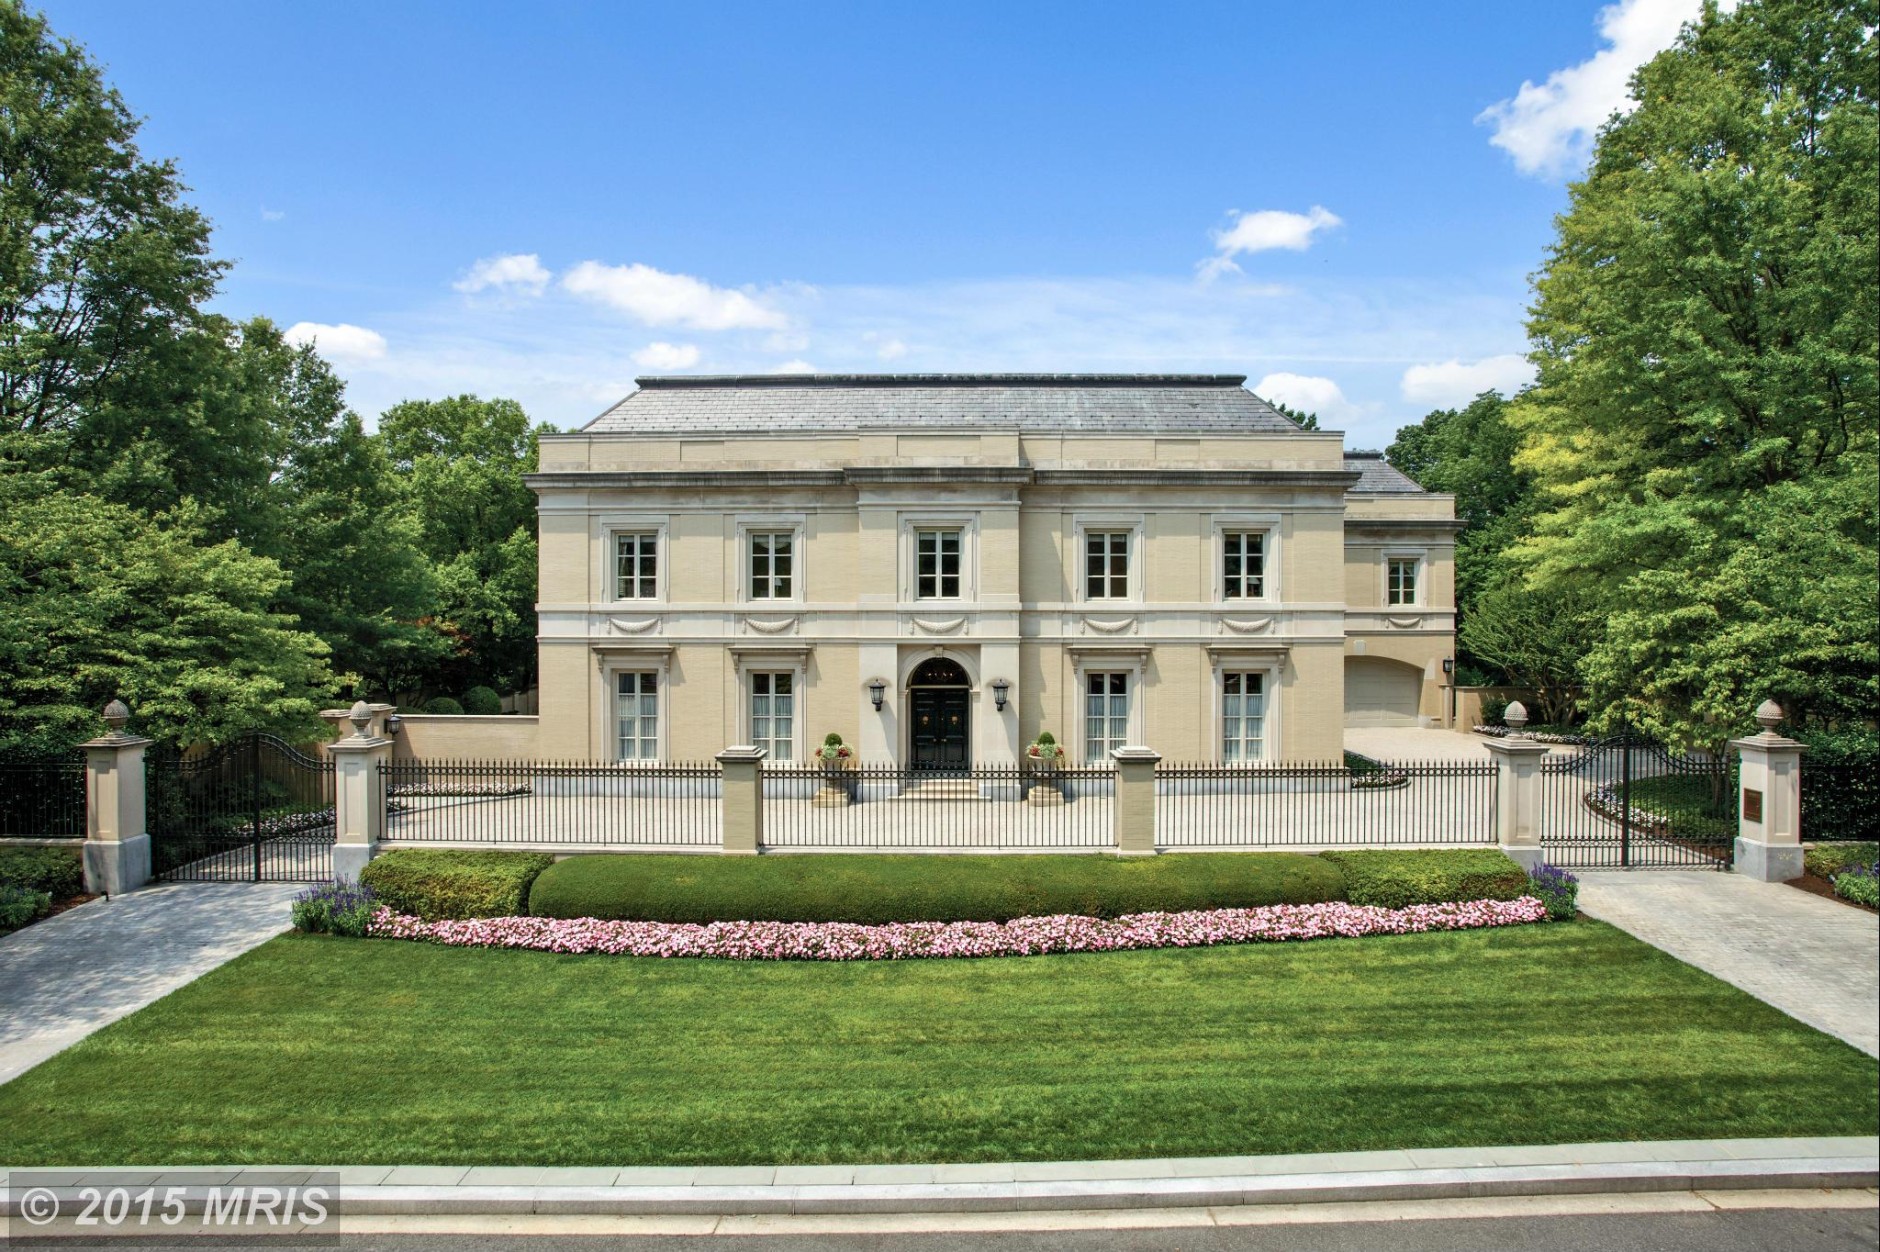 #1. This home, located at 3107 Fessenden Street NW, Washington D.C., sold for $18 million. (Metropolitan Regional Information Systems, Inc./Metropolitan Regional Information Systems, Inc.)